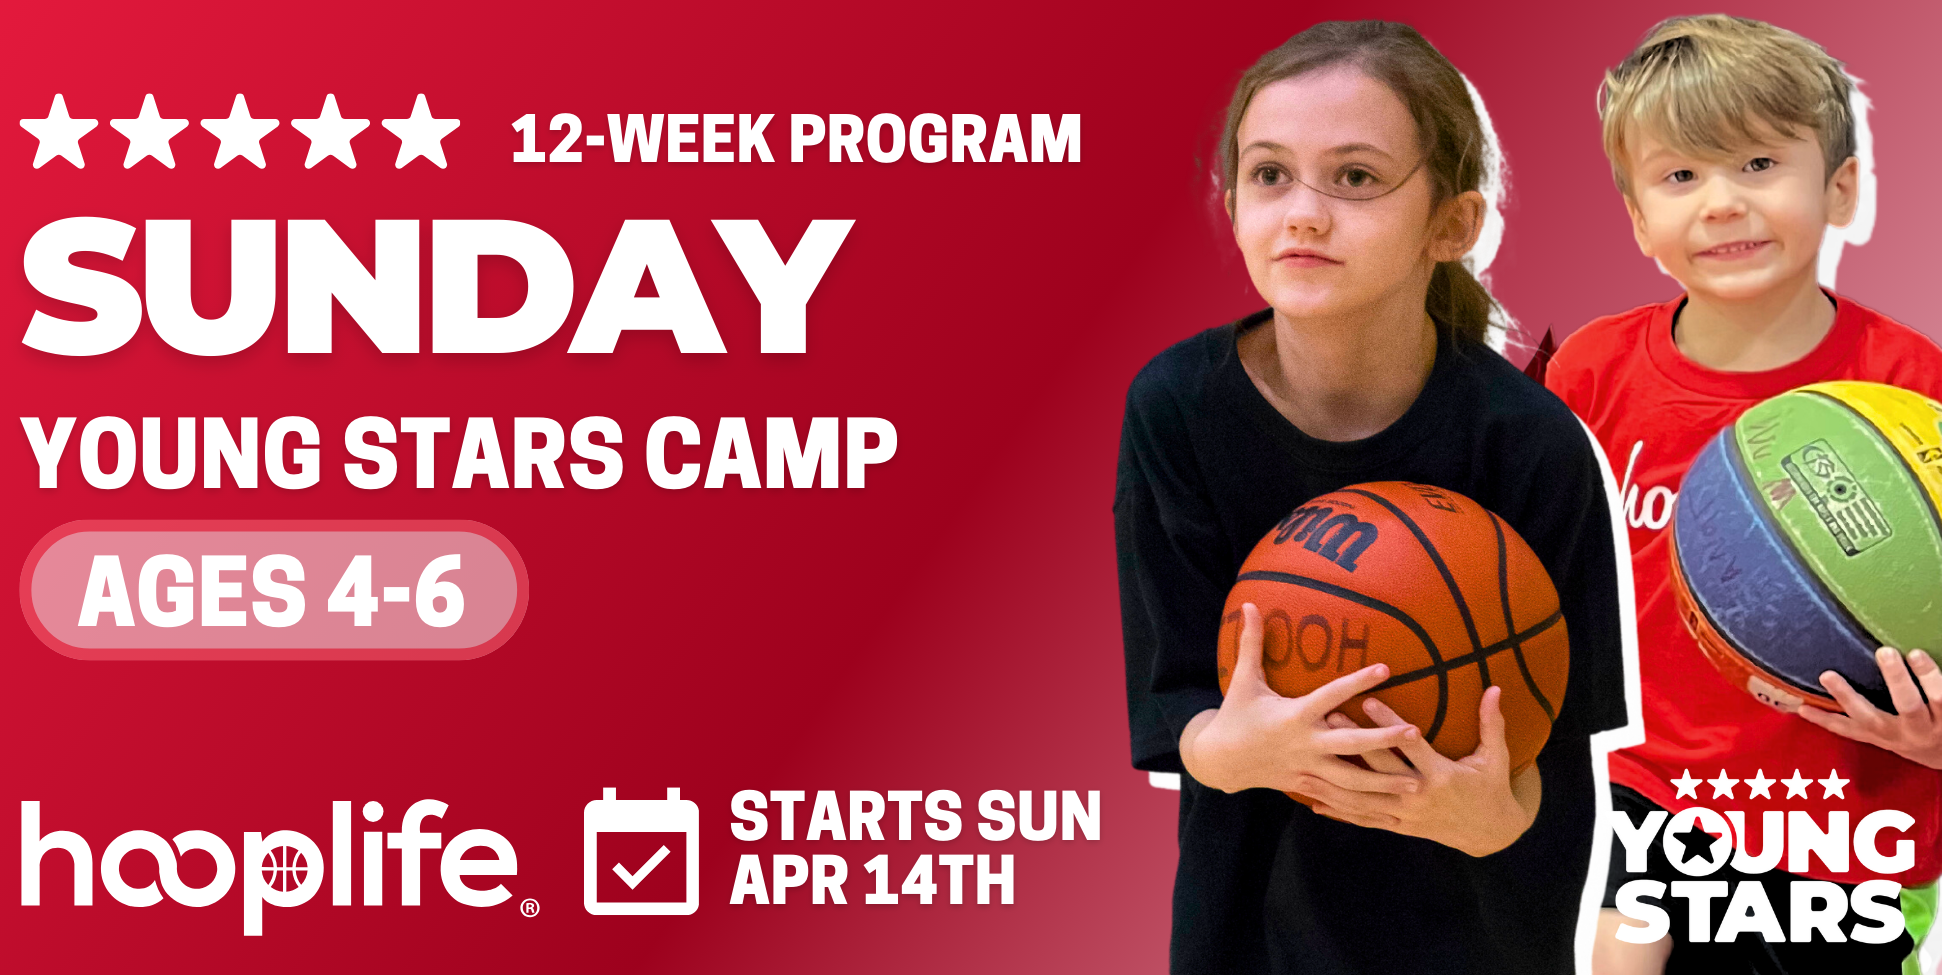 Sunday Ages 4-6 Young Stars 12-Week Camp